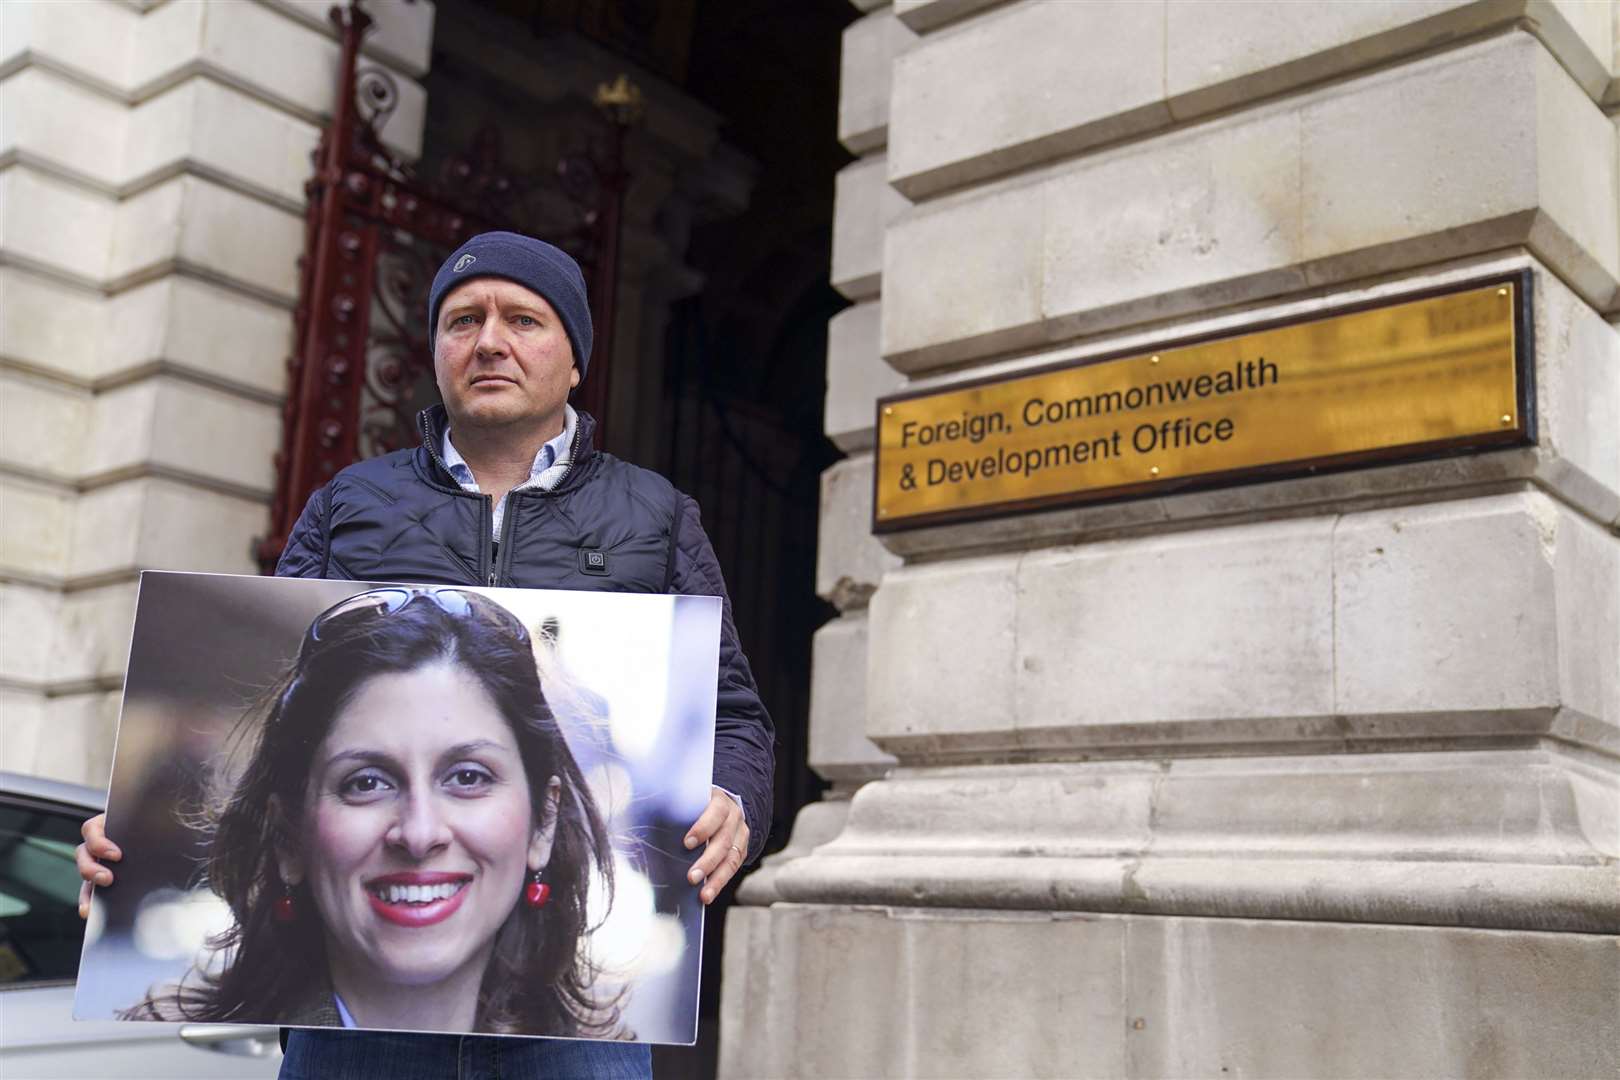 Richard Ratcliffe has gone on hunger strike for the second time in two years and intends to sleep in a tent following his wife losing her latest appeal in Iran (Steve Parsons/PA)